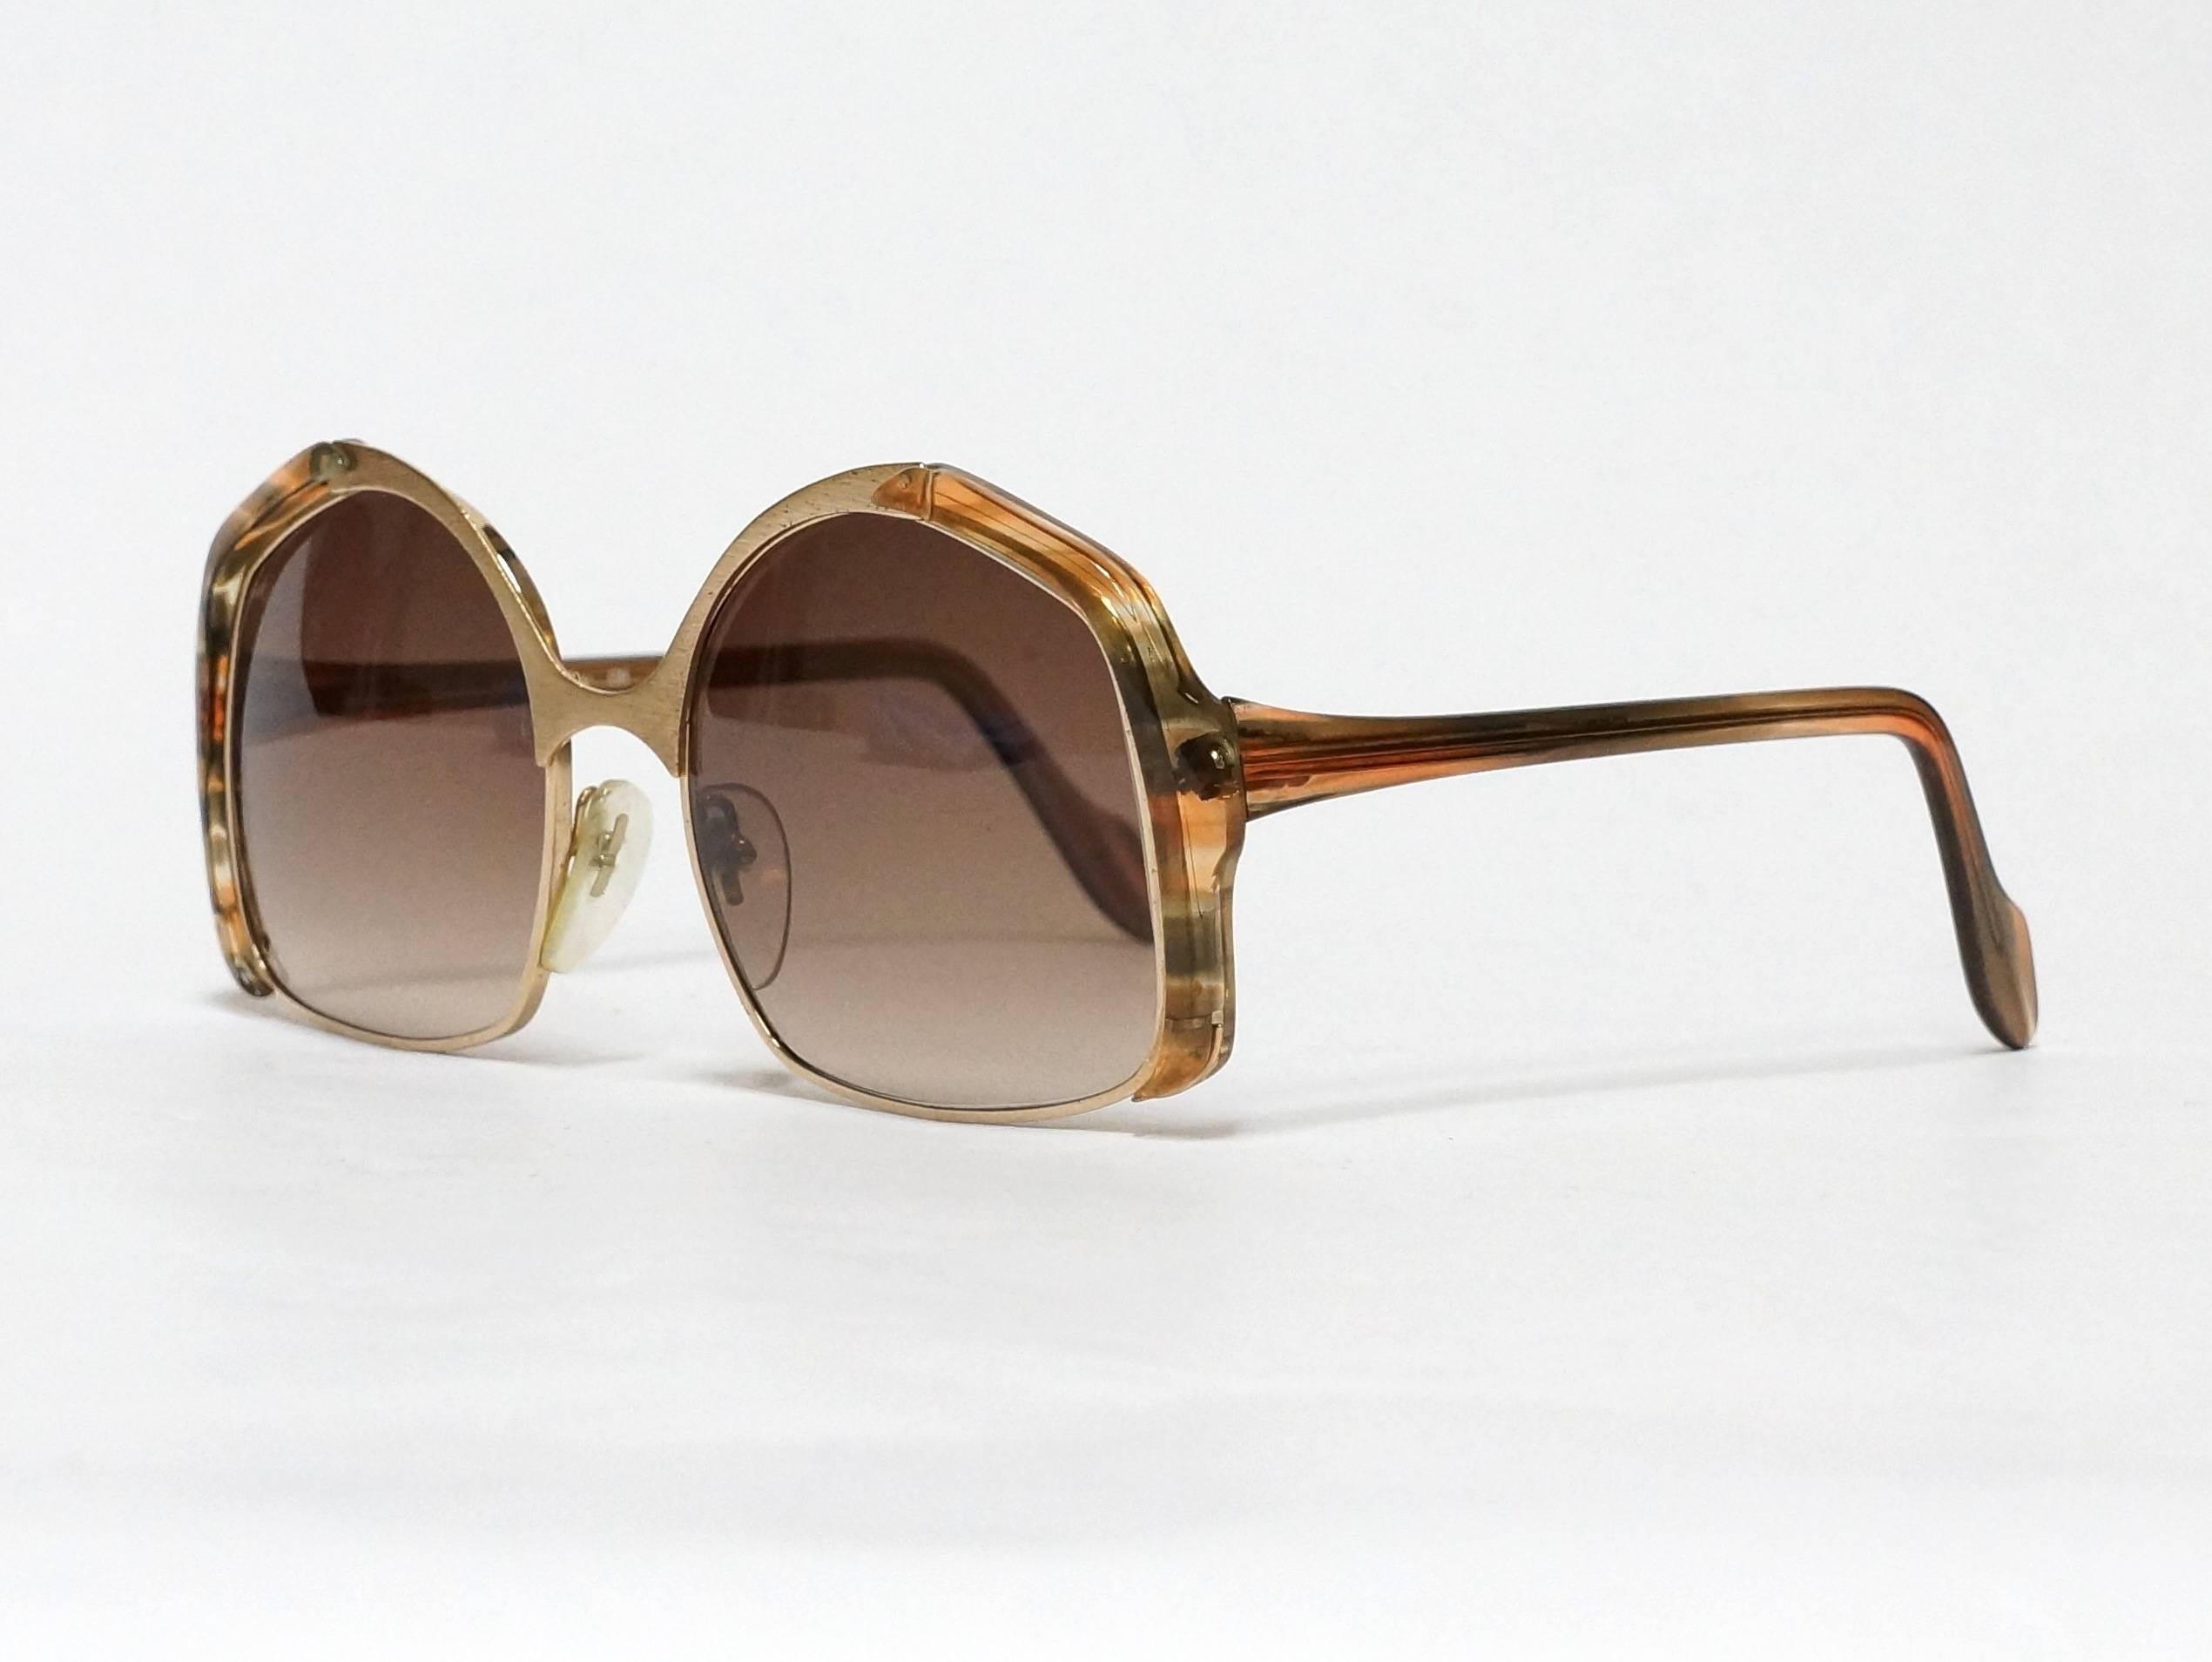 1970's vintage sunglasses by Neostyle, made in Germany. Gold metal optical frame with brushed metal highlights, acetate temples and side accents in new old stock condition. 

Model: Office 5
size: 54▢18 -135

approximate dimensions:
temple